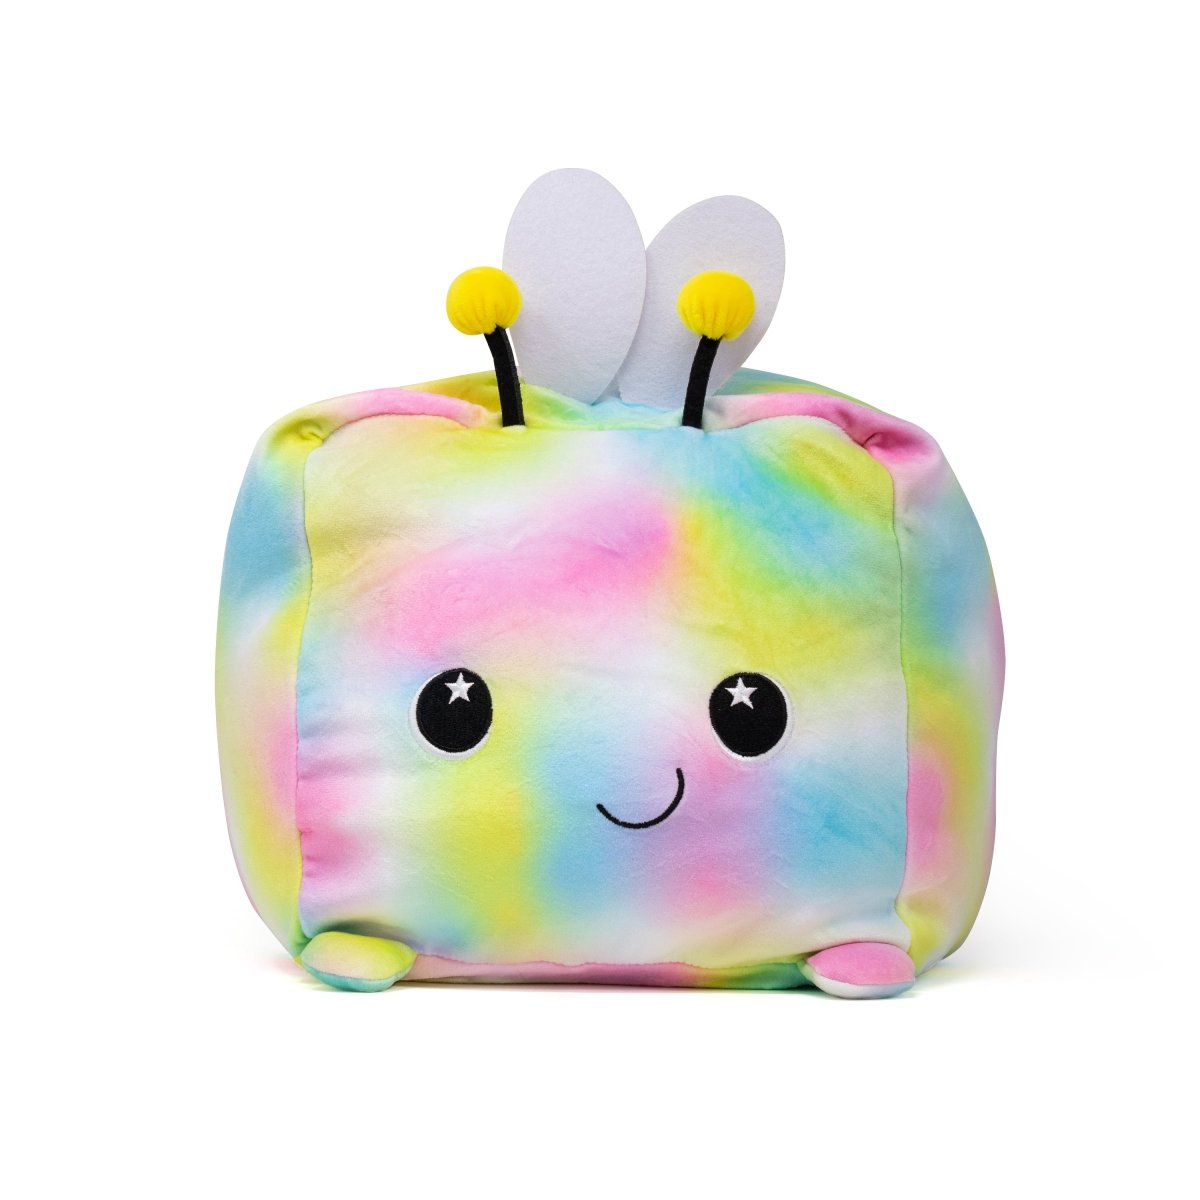 Flora the Bee plush toy with dreamy tie-dye colors and adorable antennae from Moosh-Moosh SQUARED² Collection.